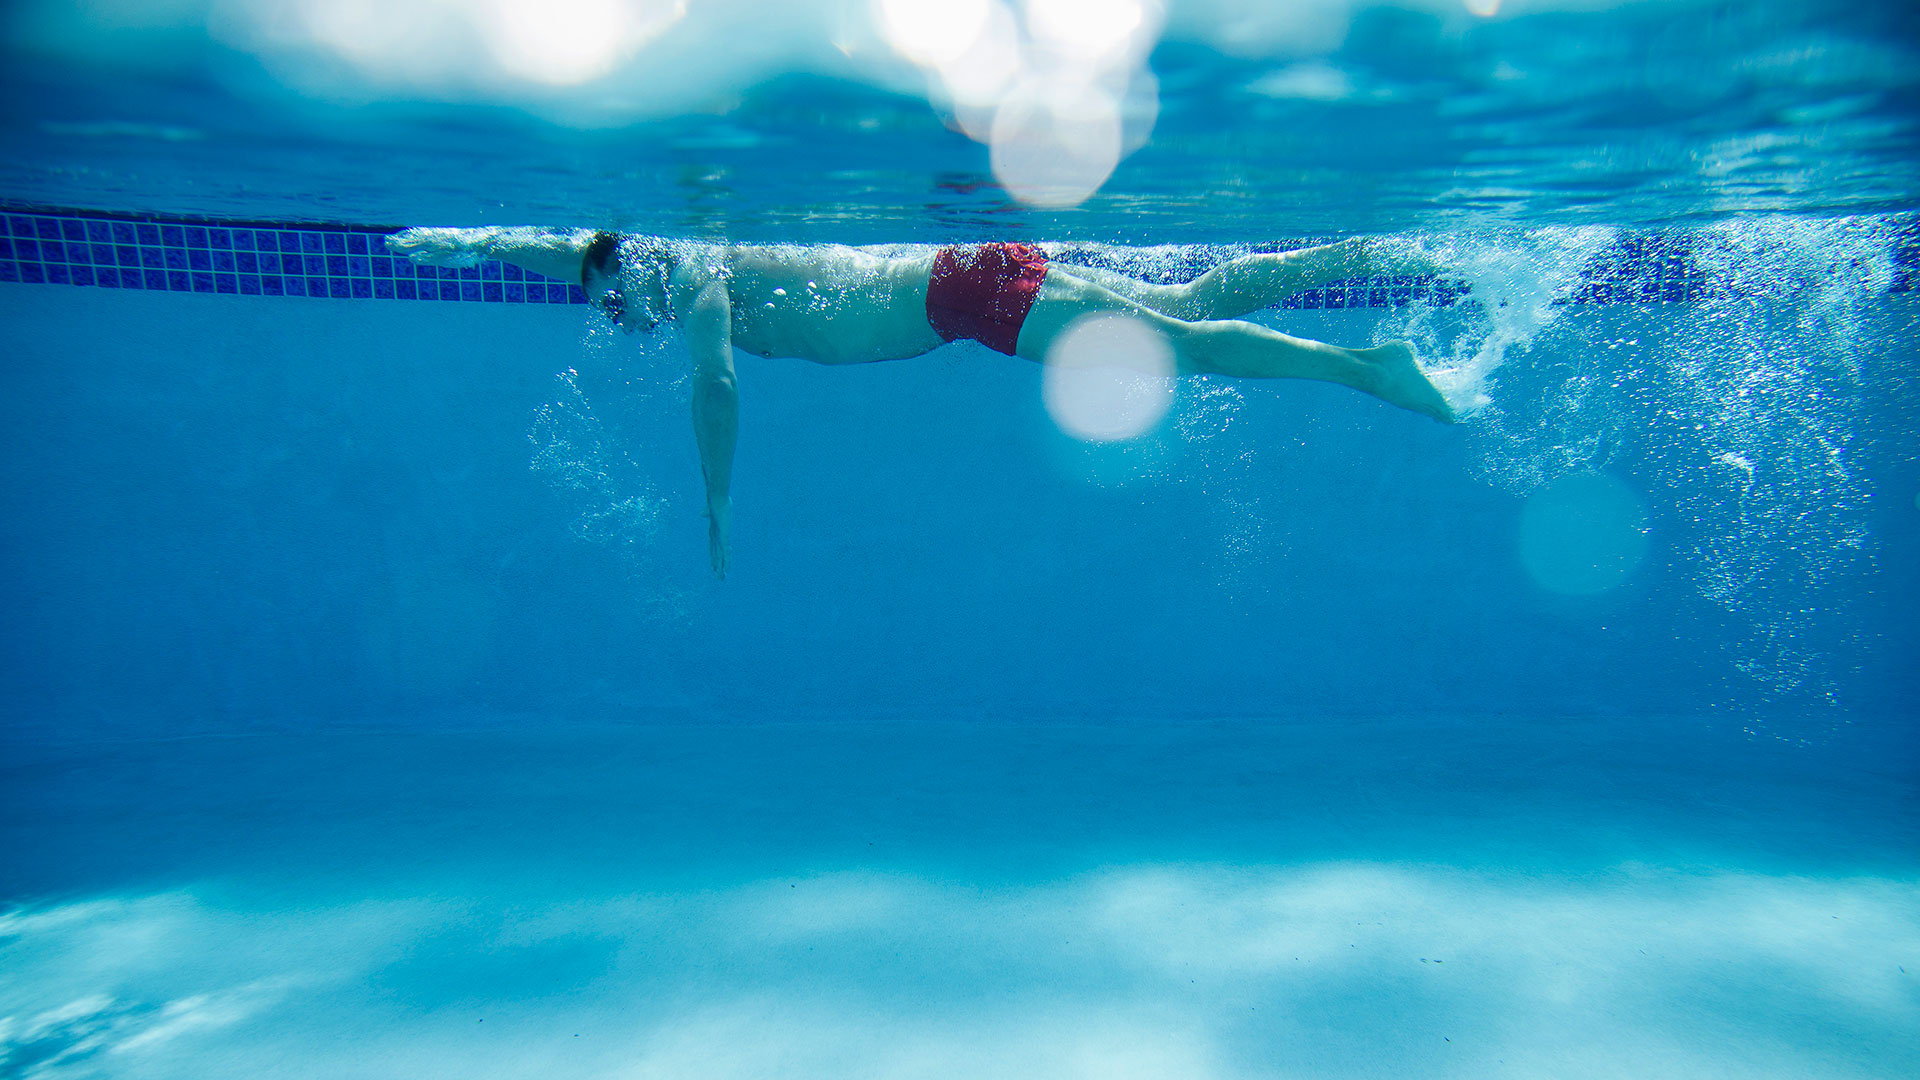 Regular swimmers had a 28% lower risk of premature death